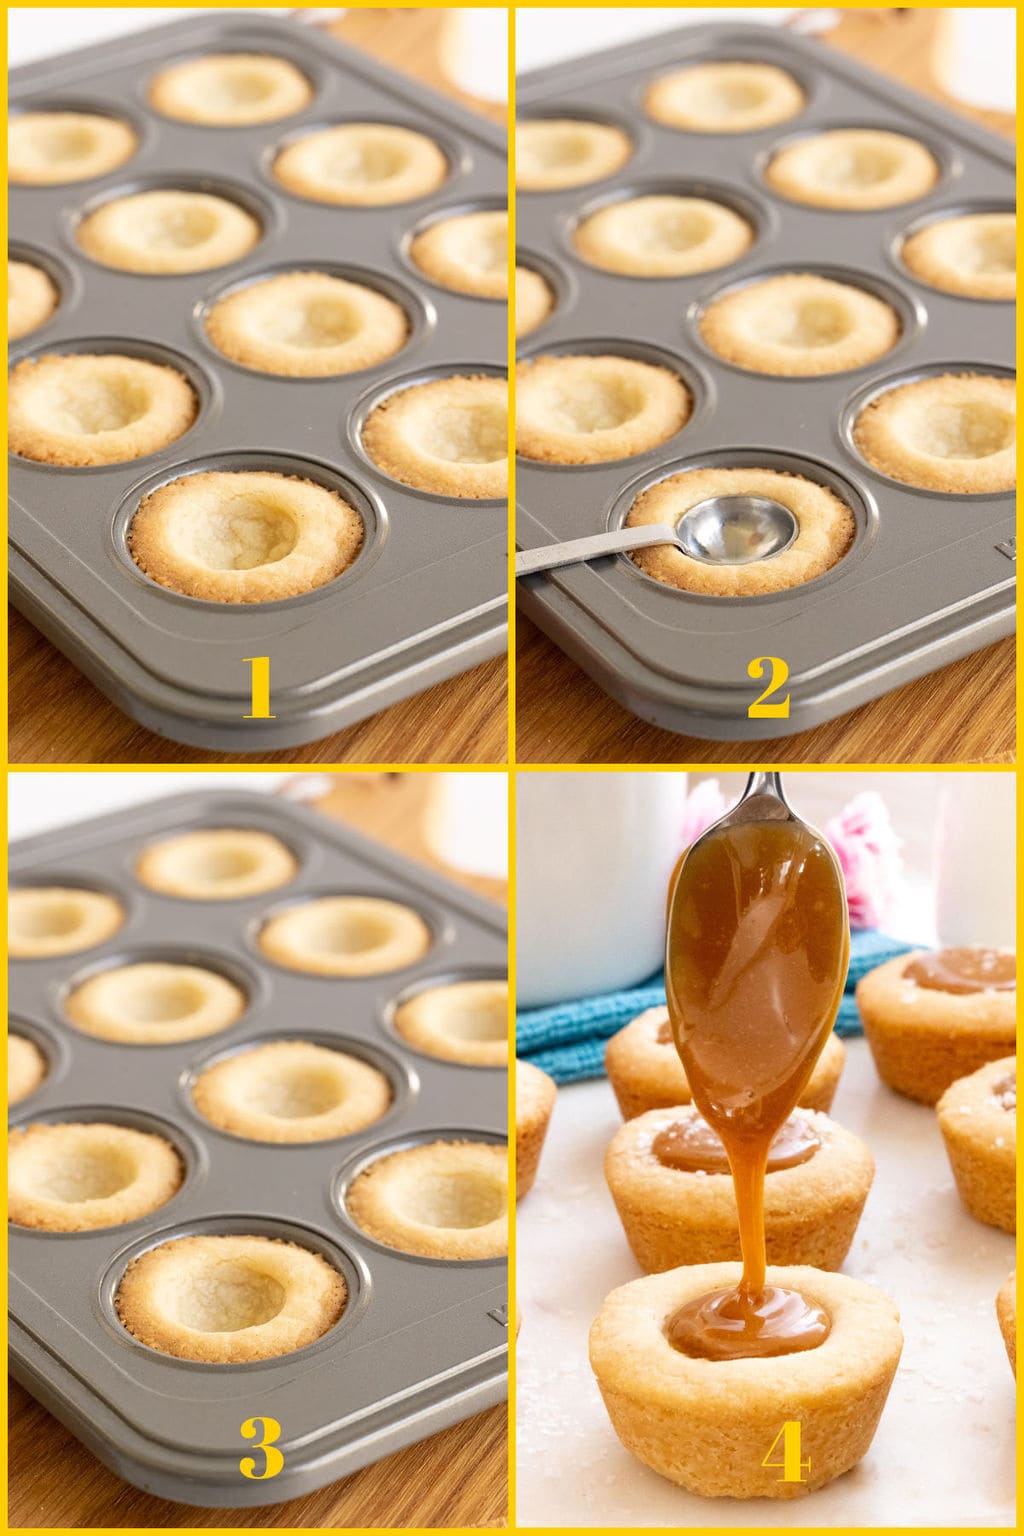 Vertical 4-photo tutorial collage of how to finish making wells for the caramel for Ridiculously Easy Salted Caramel Shortbread Bites.